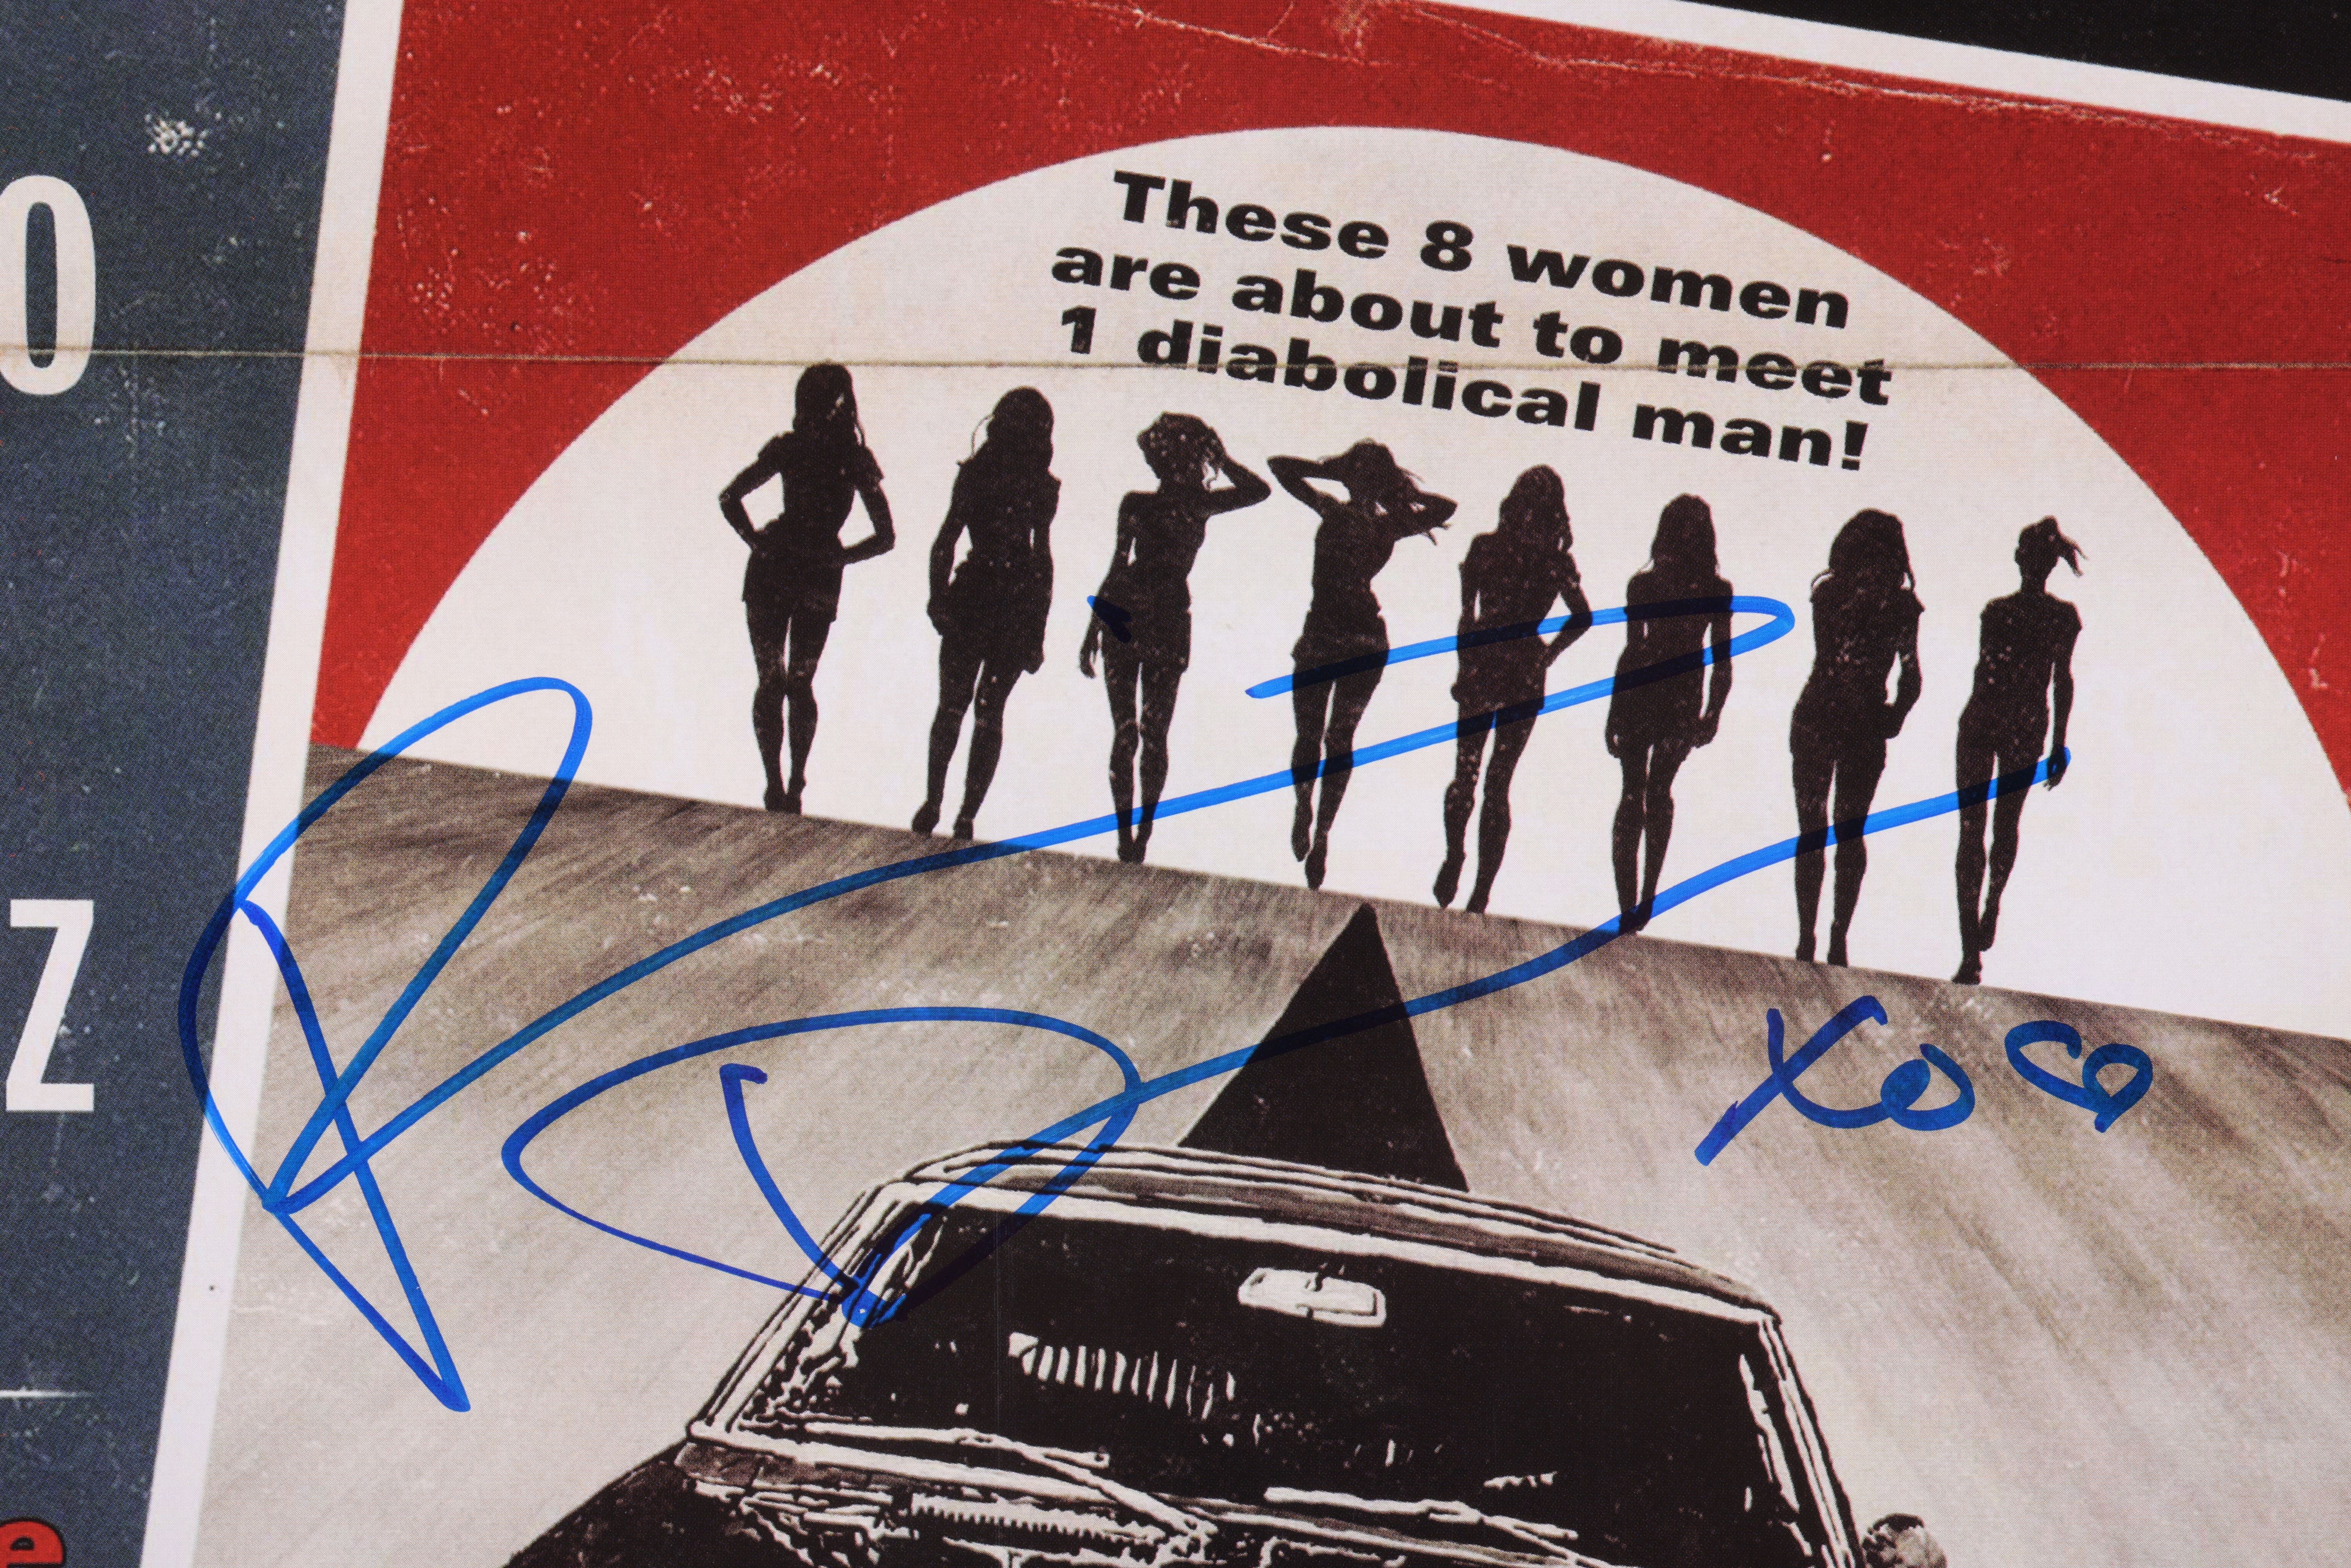 GRINDHOUSE (2007) - Rosario Dawson and Rose McGowan Autographed Poster - Image 3 of 3